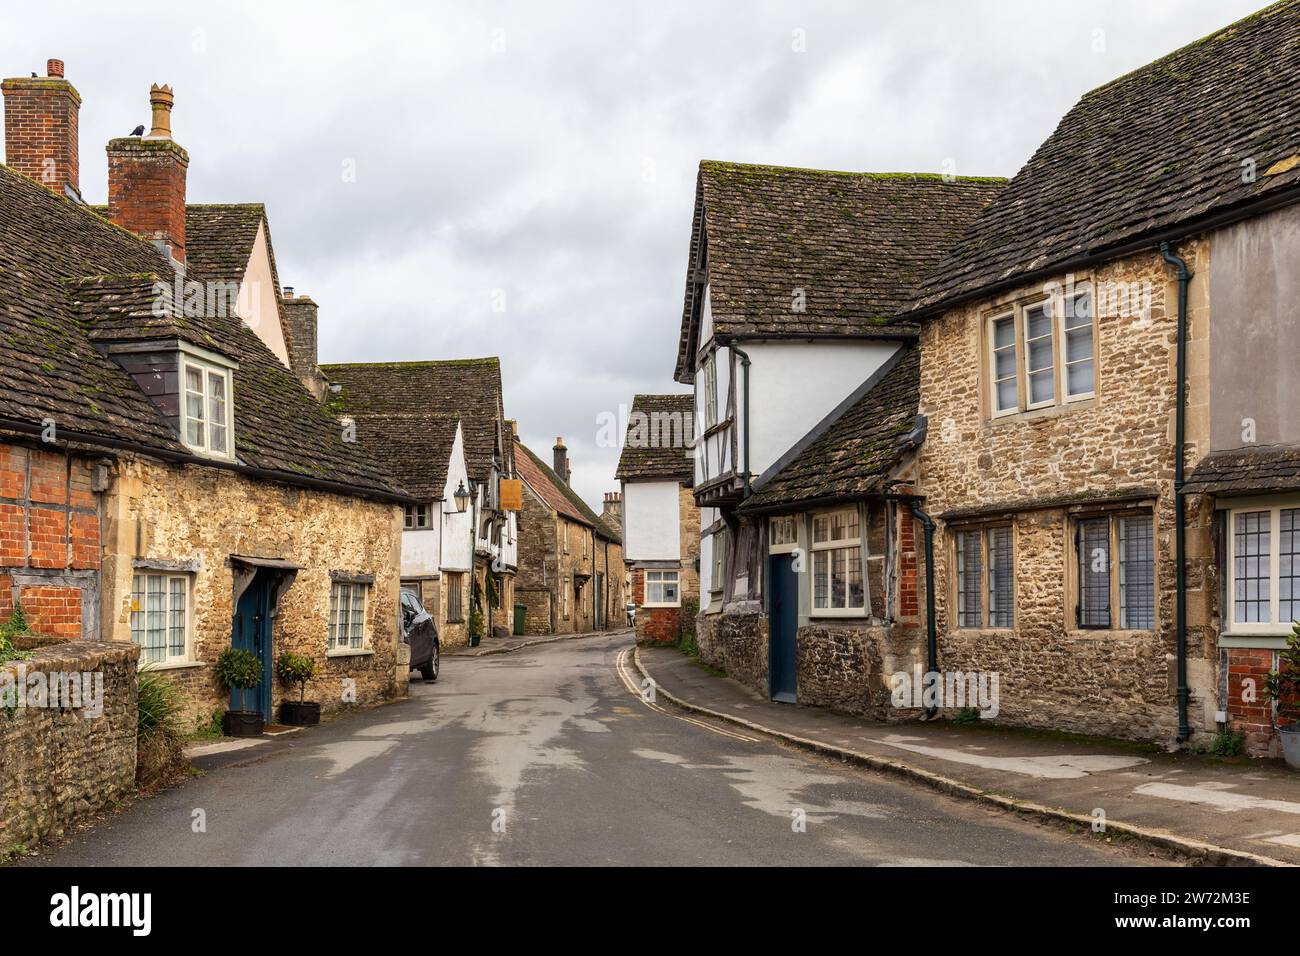 Traditional stone and half timber framed cottages in the National Trust village of Lacock in December, Wiltshire, England, UK Stock Photo